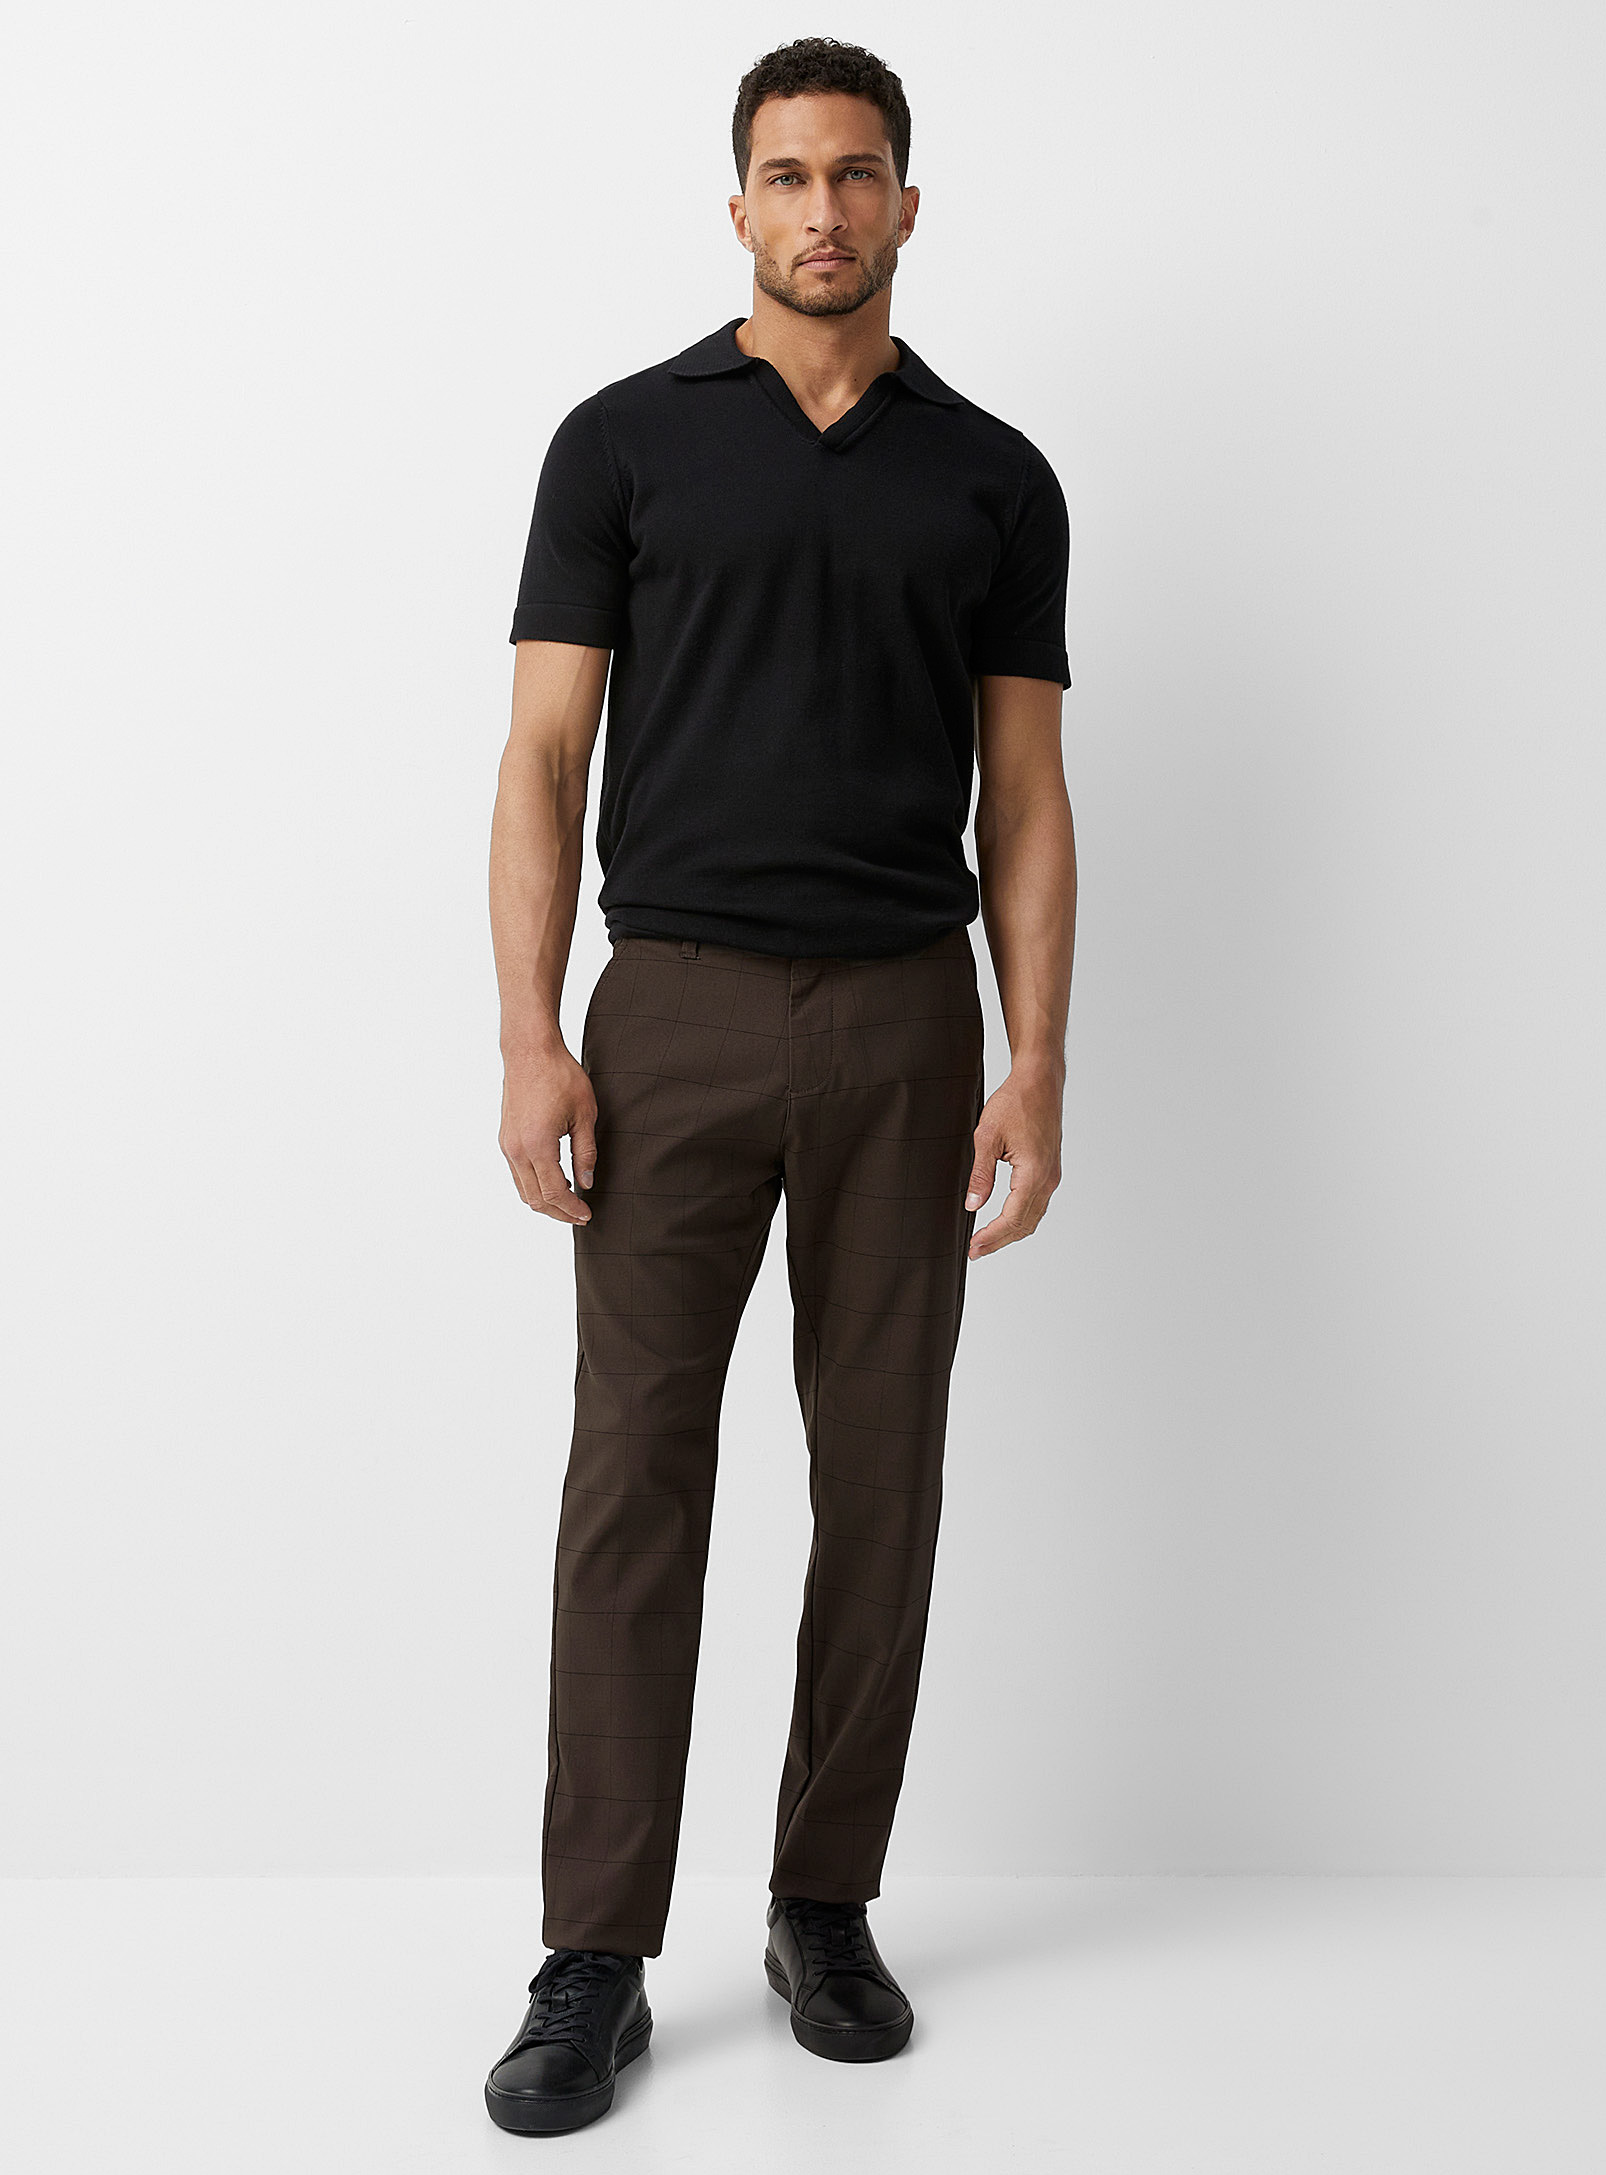 Projek Raw Windowpane Check Stretch Pant Skinny Fit In Patterned Brown